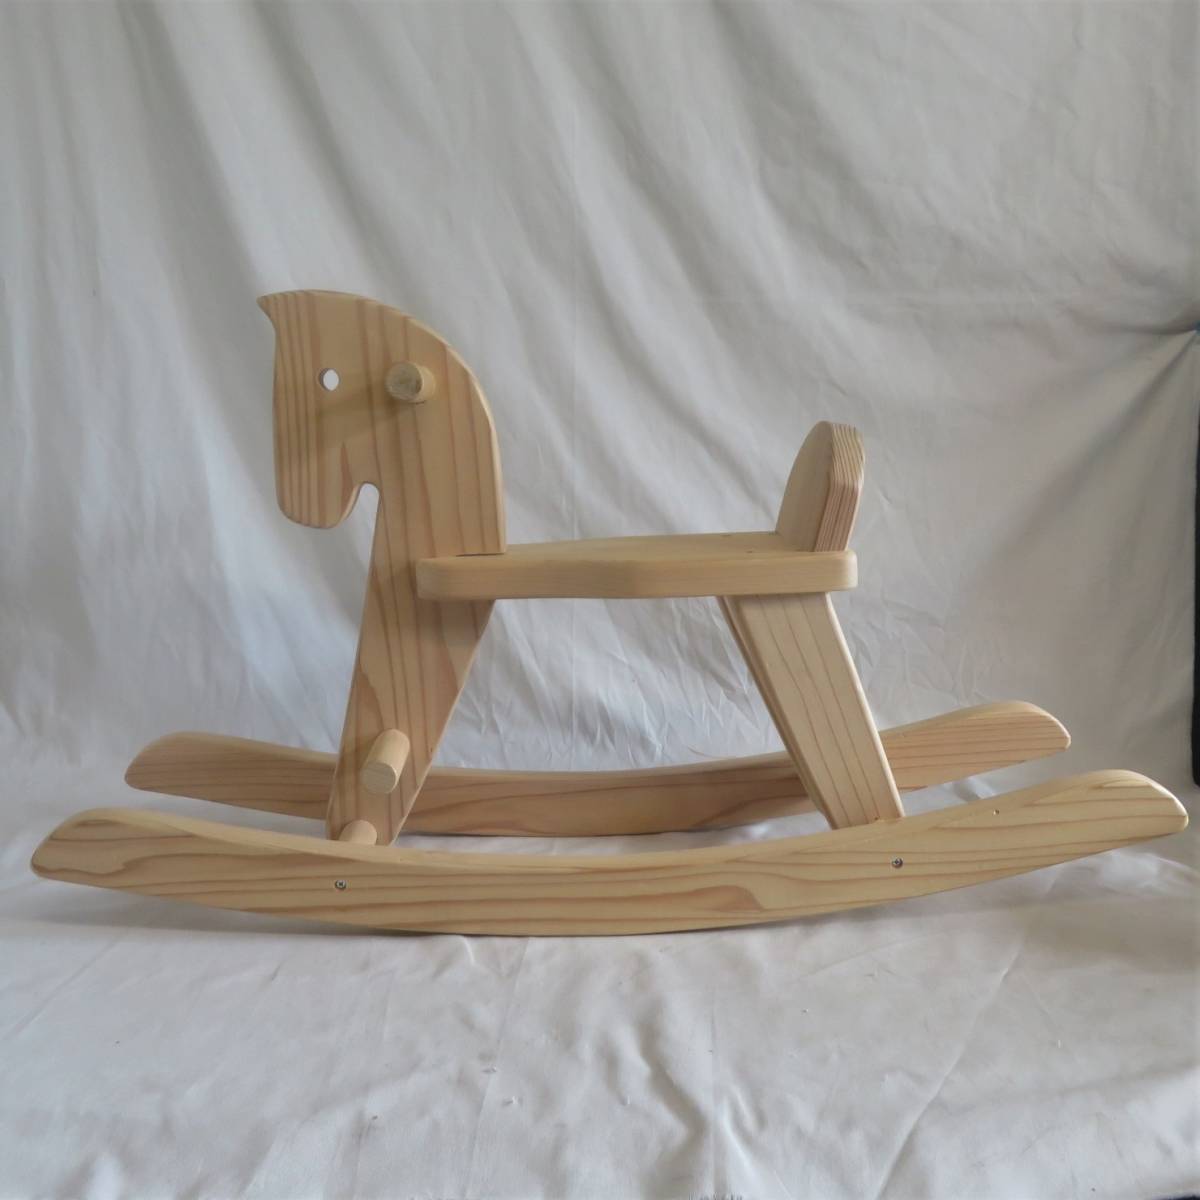  reference price 18,480 jpy [ Aichi store ] wooden horse locking hose wooden toy width 77.5cm× depth 20.5cm× height 43cm wooden toy vehicle playground equipment 